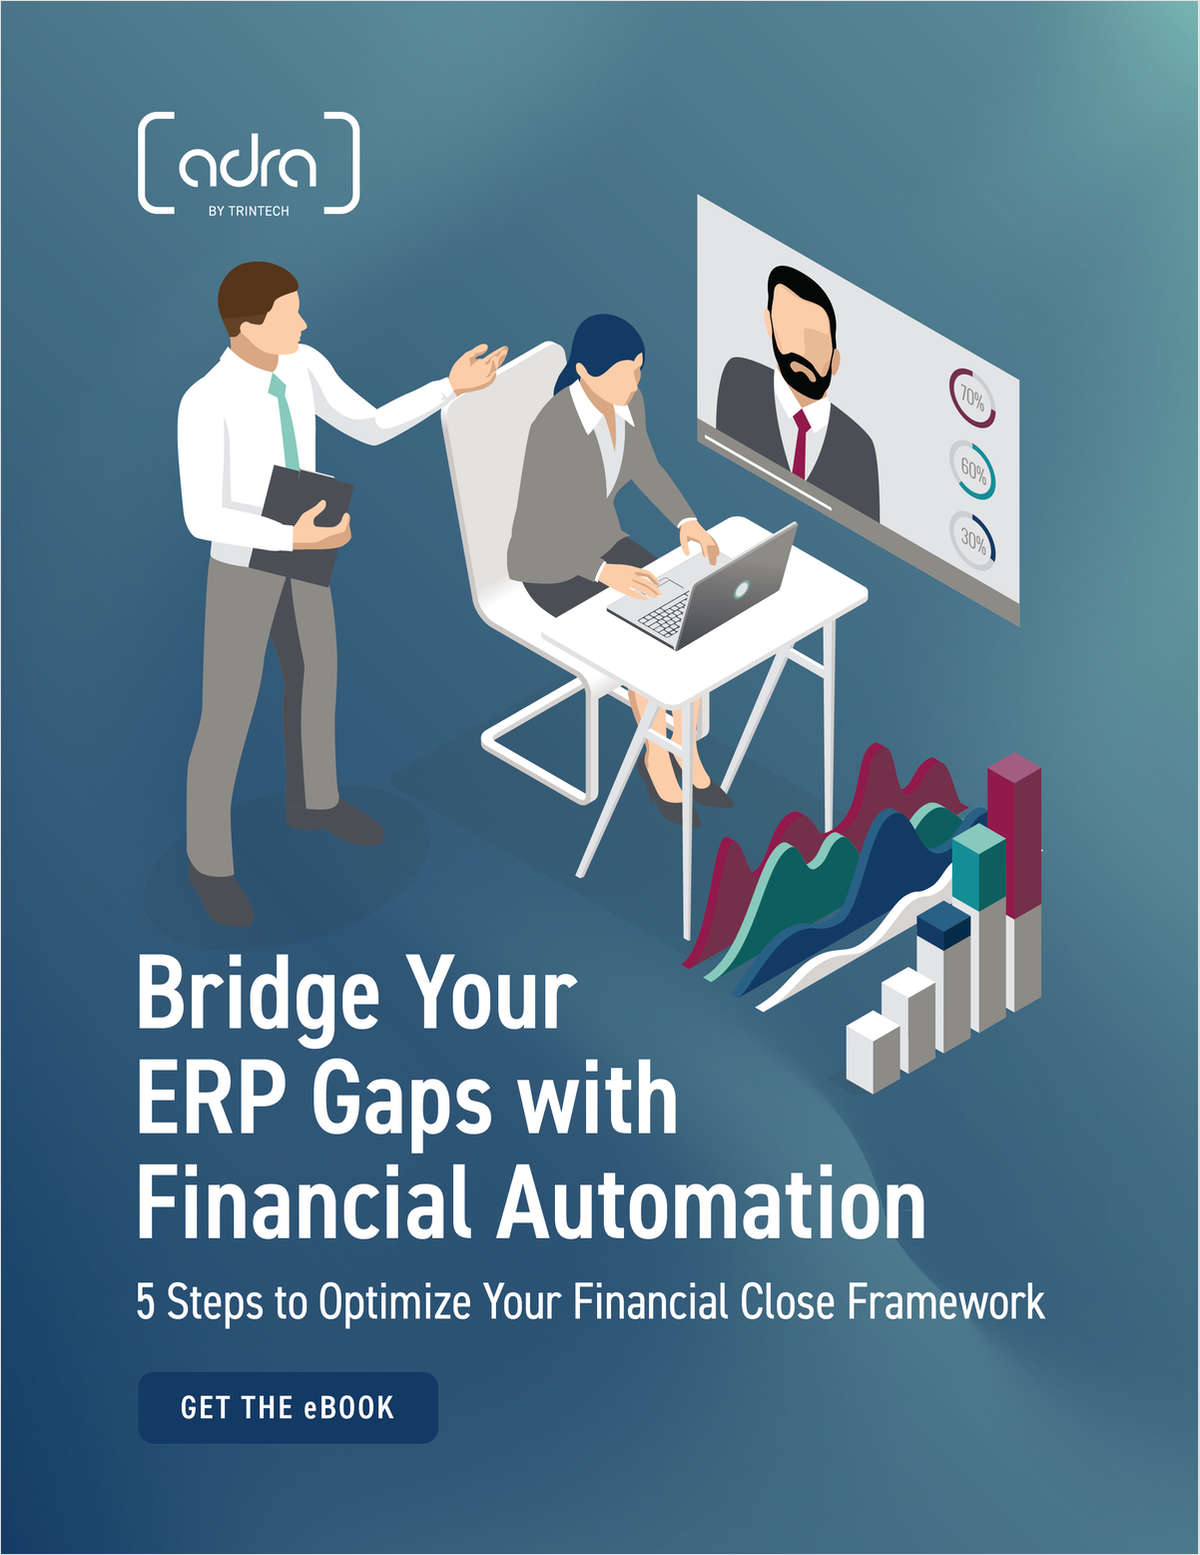 Bridge Your ERP Gaps with Financial Automation